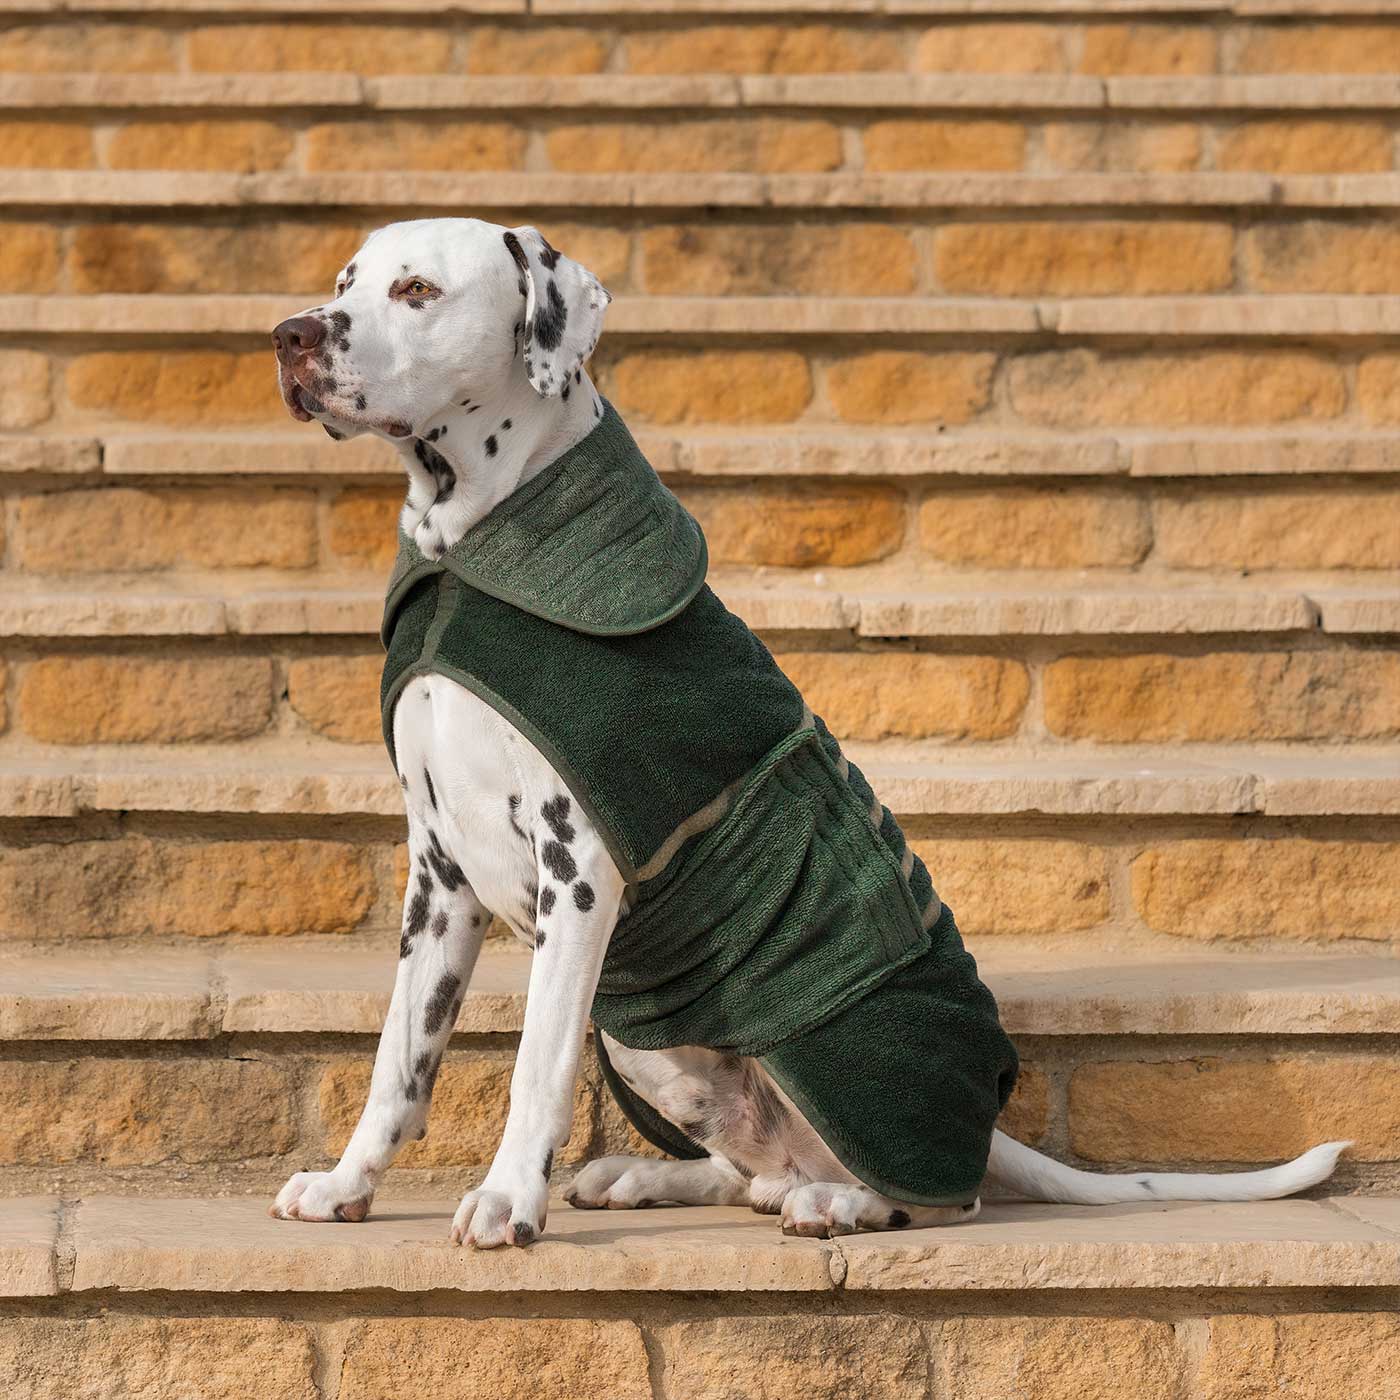 Introducing the ultimate bamboo dog drying coat in beautiful fir green, made from luxurious bamboo to aid sensitive skin featuring adjustable Velcro neck and waist fastening with super absorbent material for easy pet drying! Available now at Lords & Labradors US, In five sizes and four colors to suit all breeds!